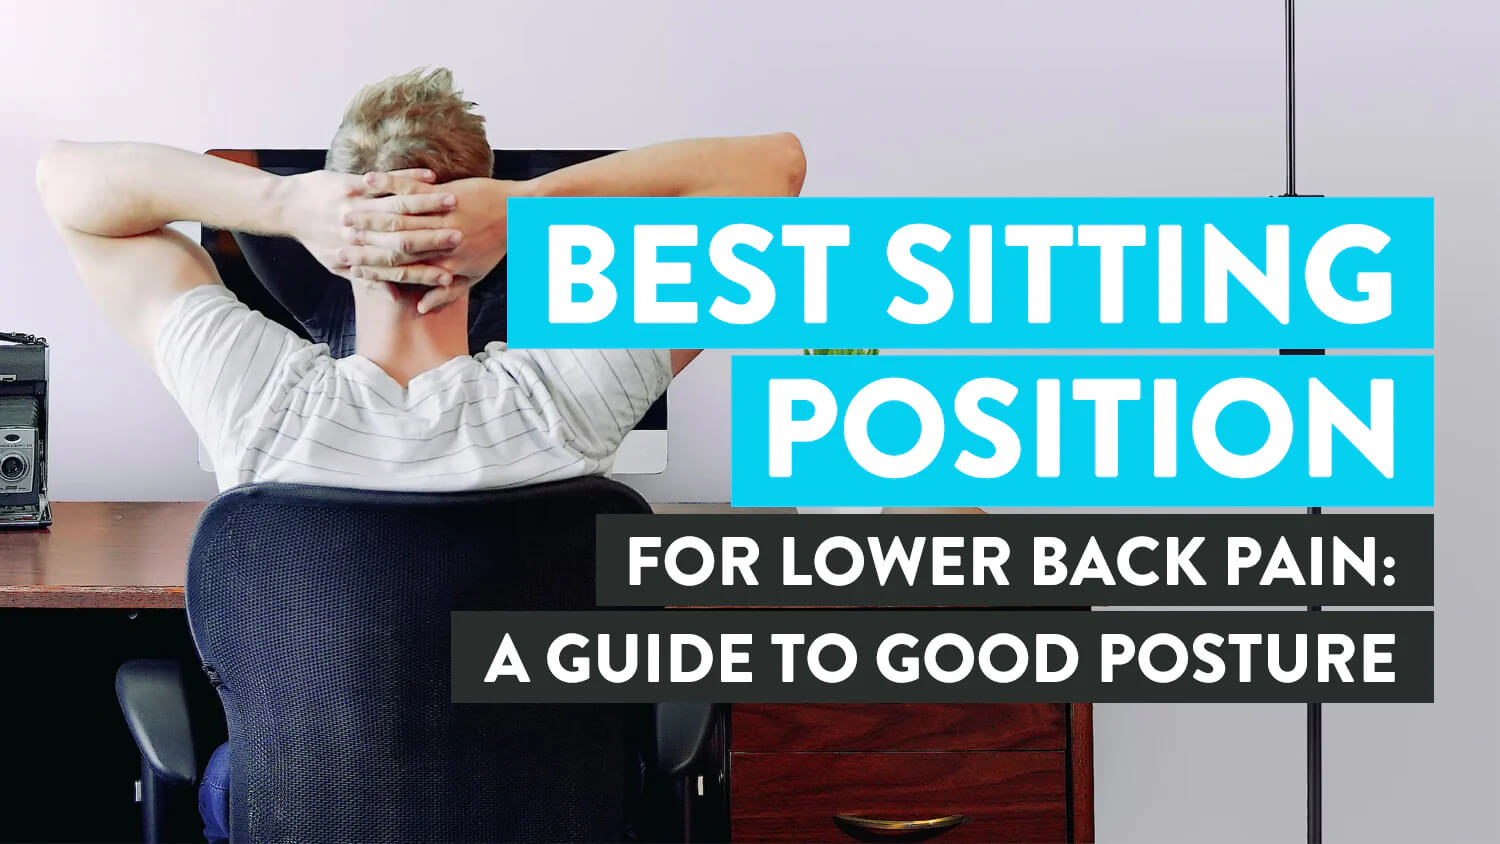 Experience weightless sitting and better posture with this cushion